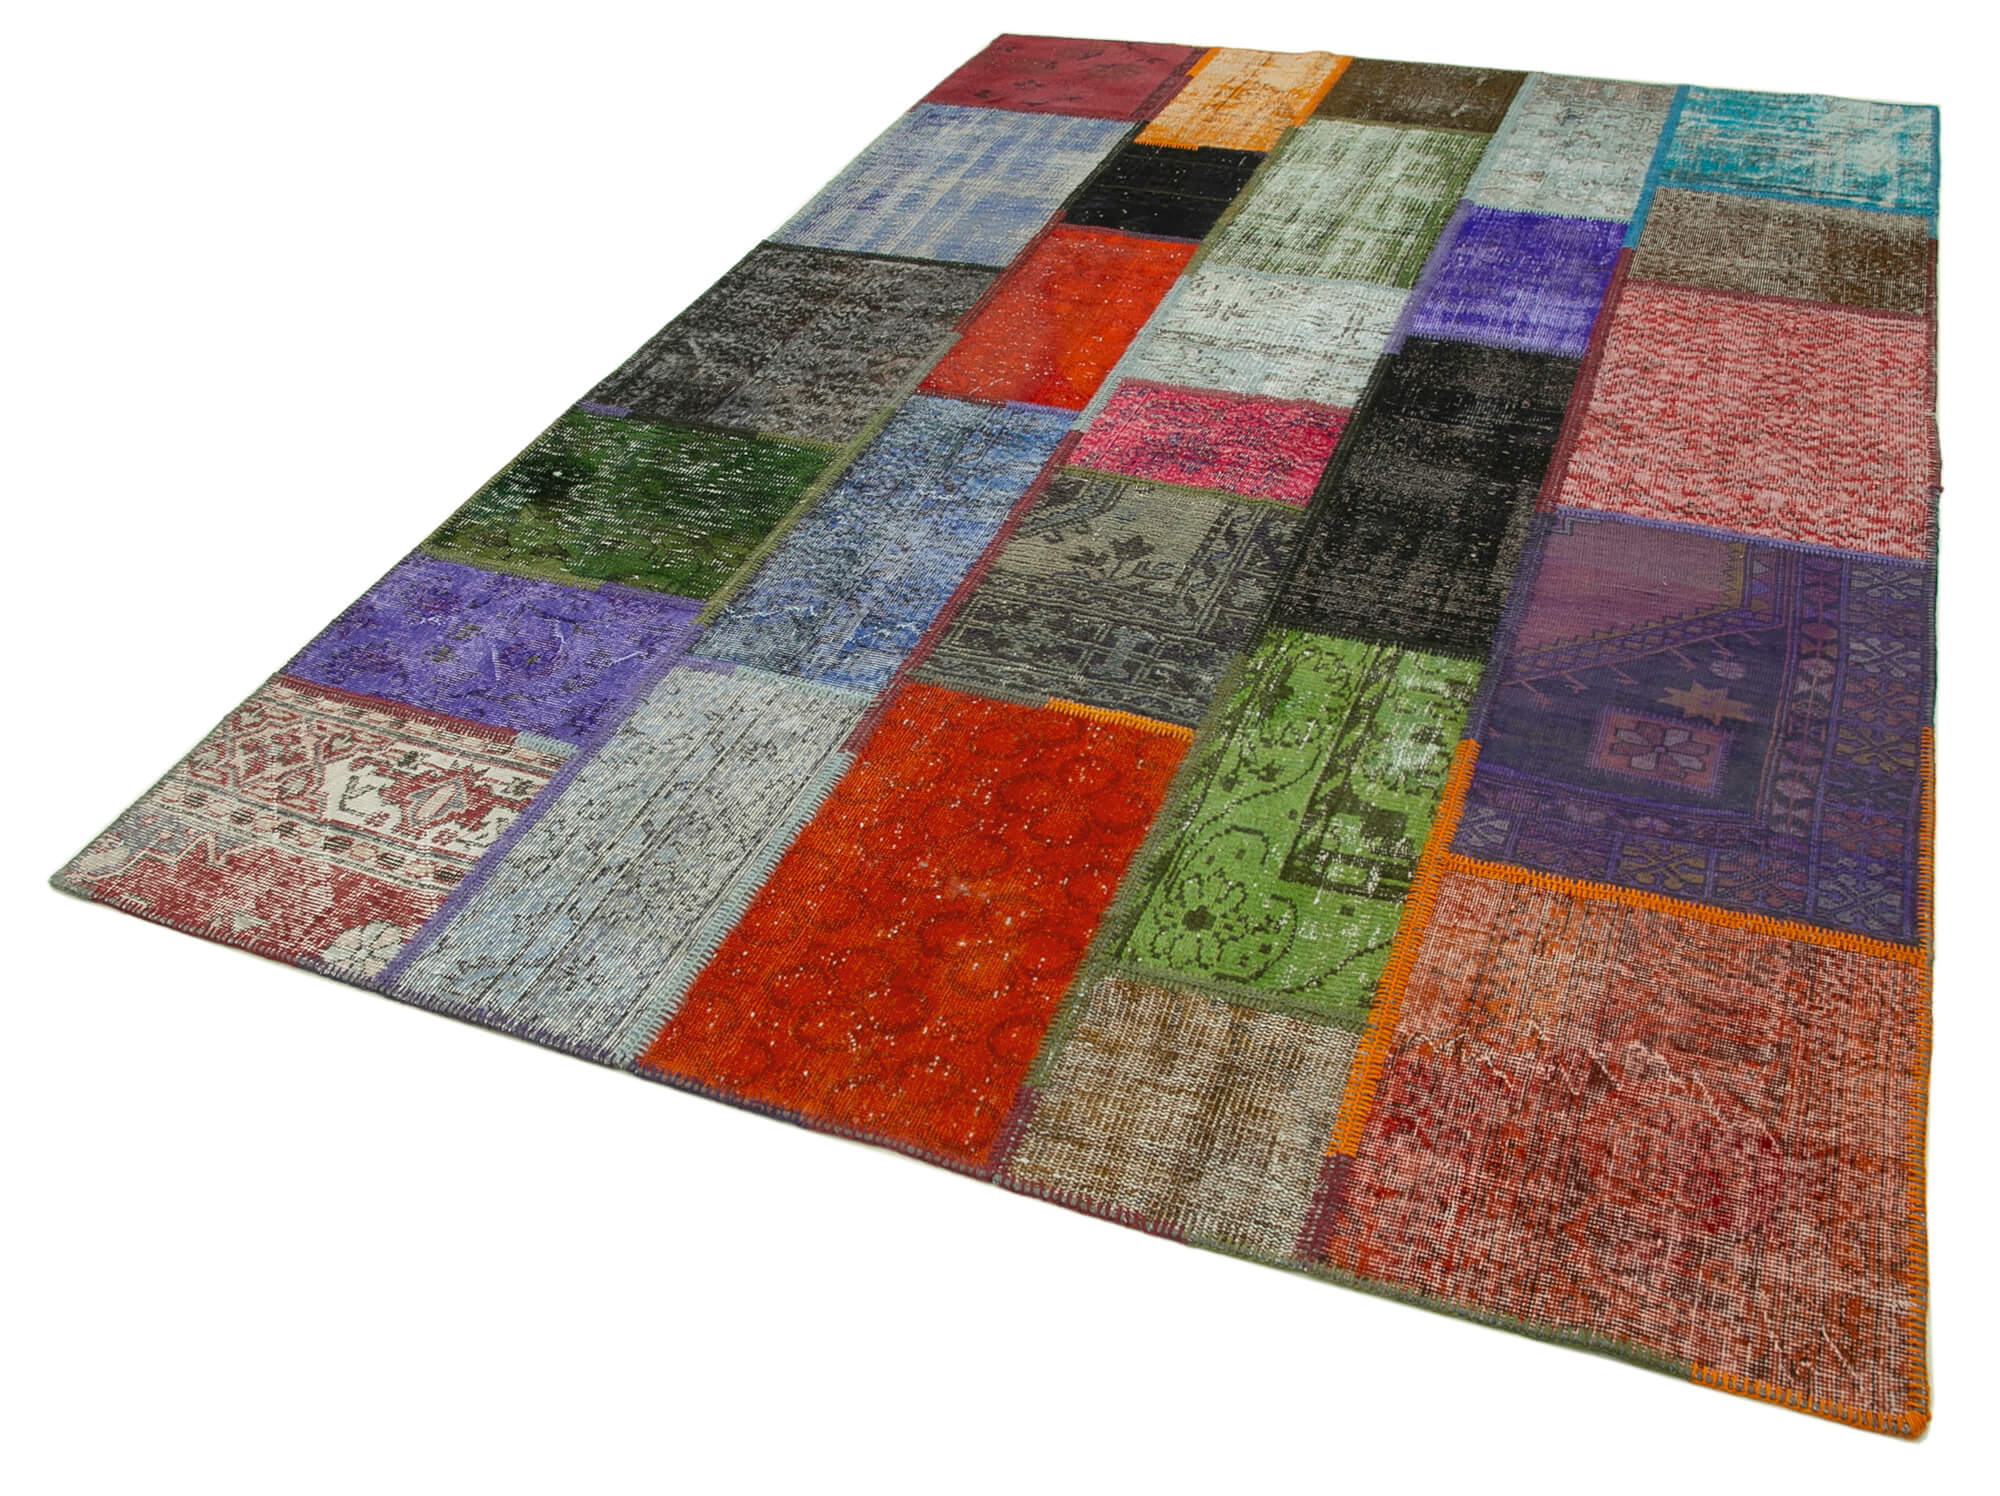 6x9 Multicolor Overdyed Wool Patchwork Area Rug -3330